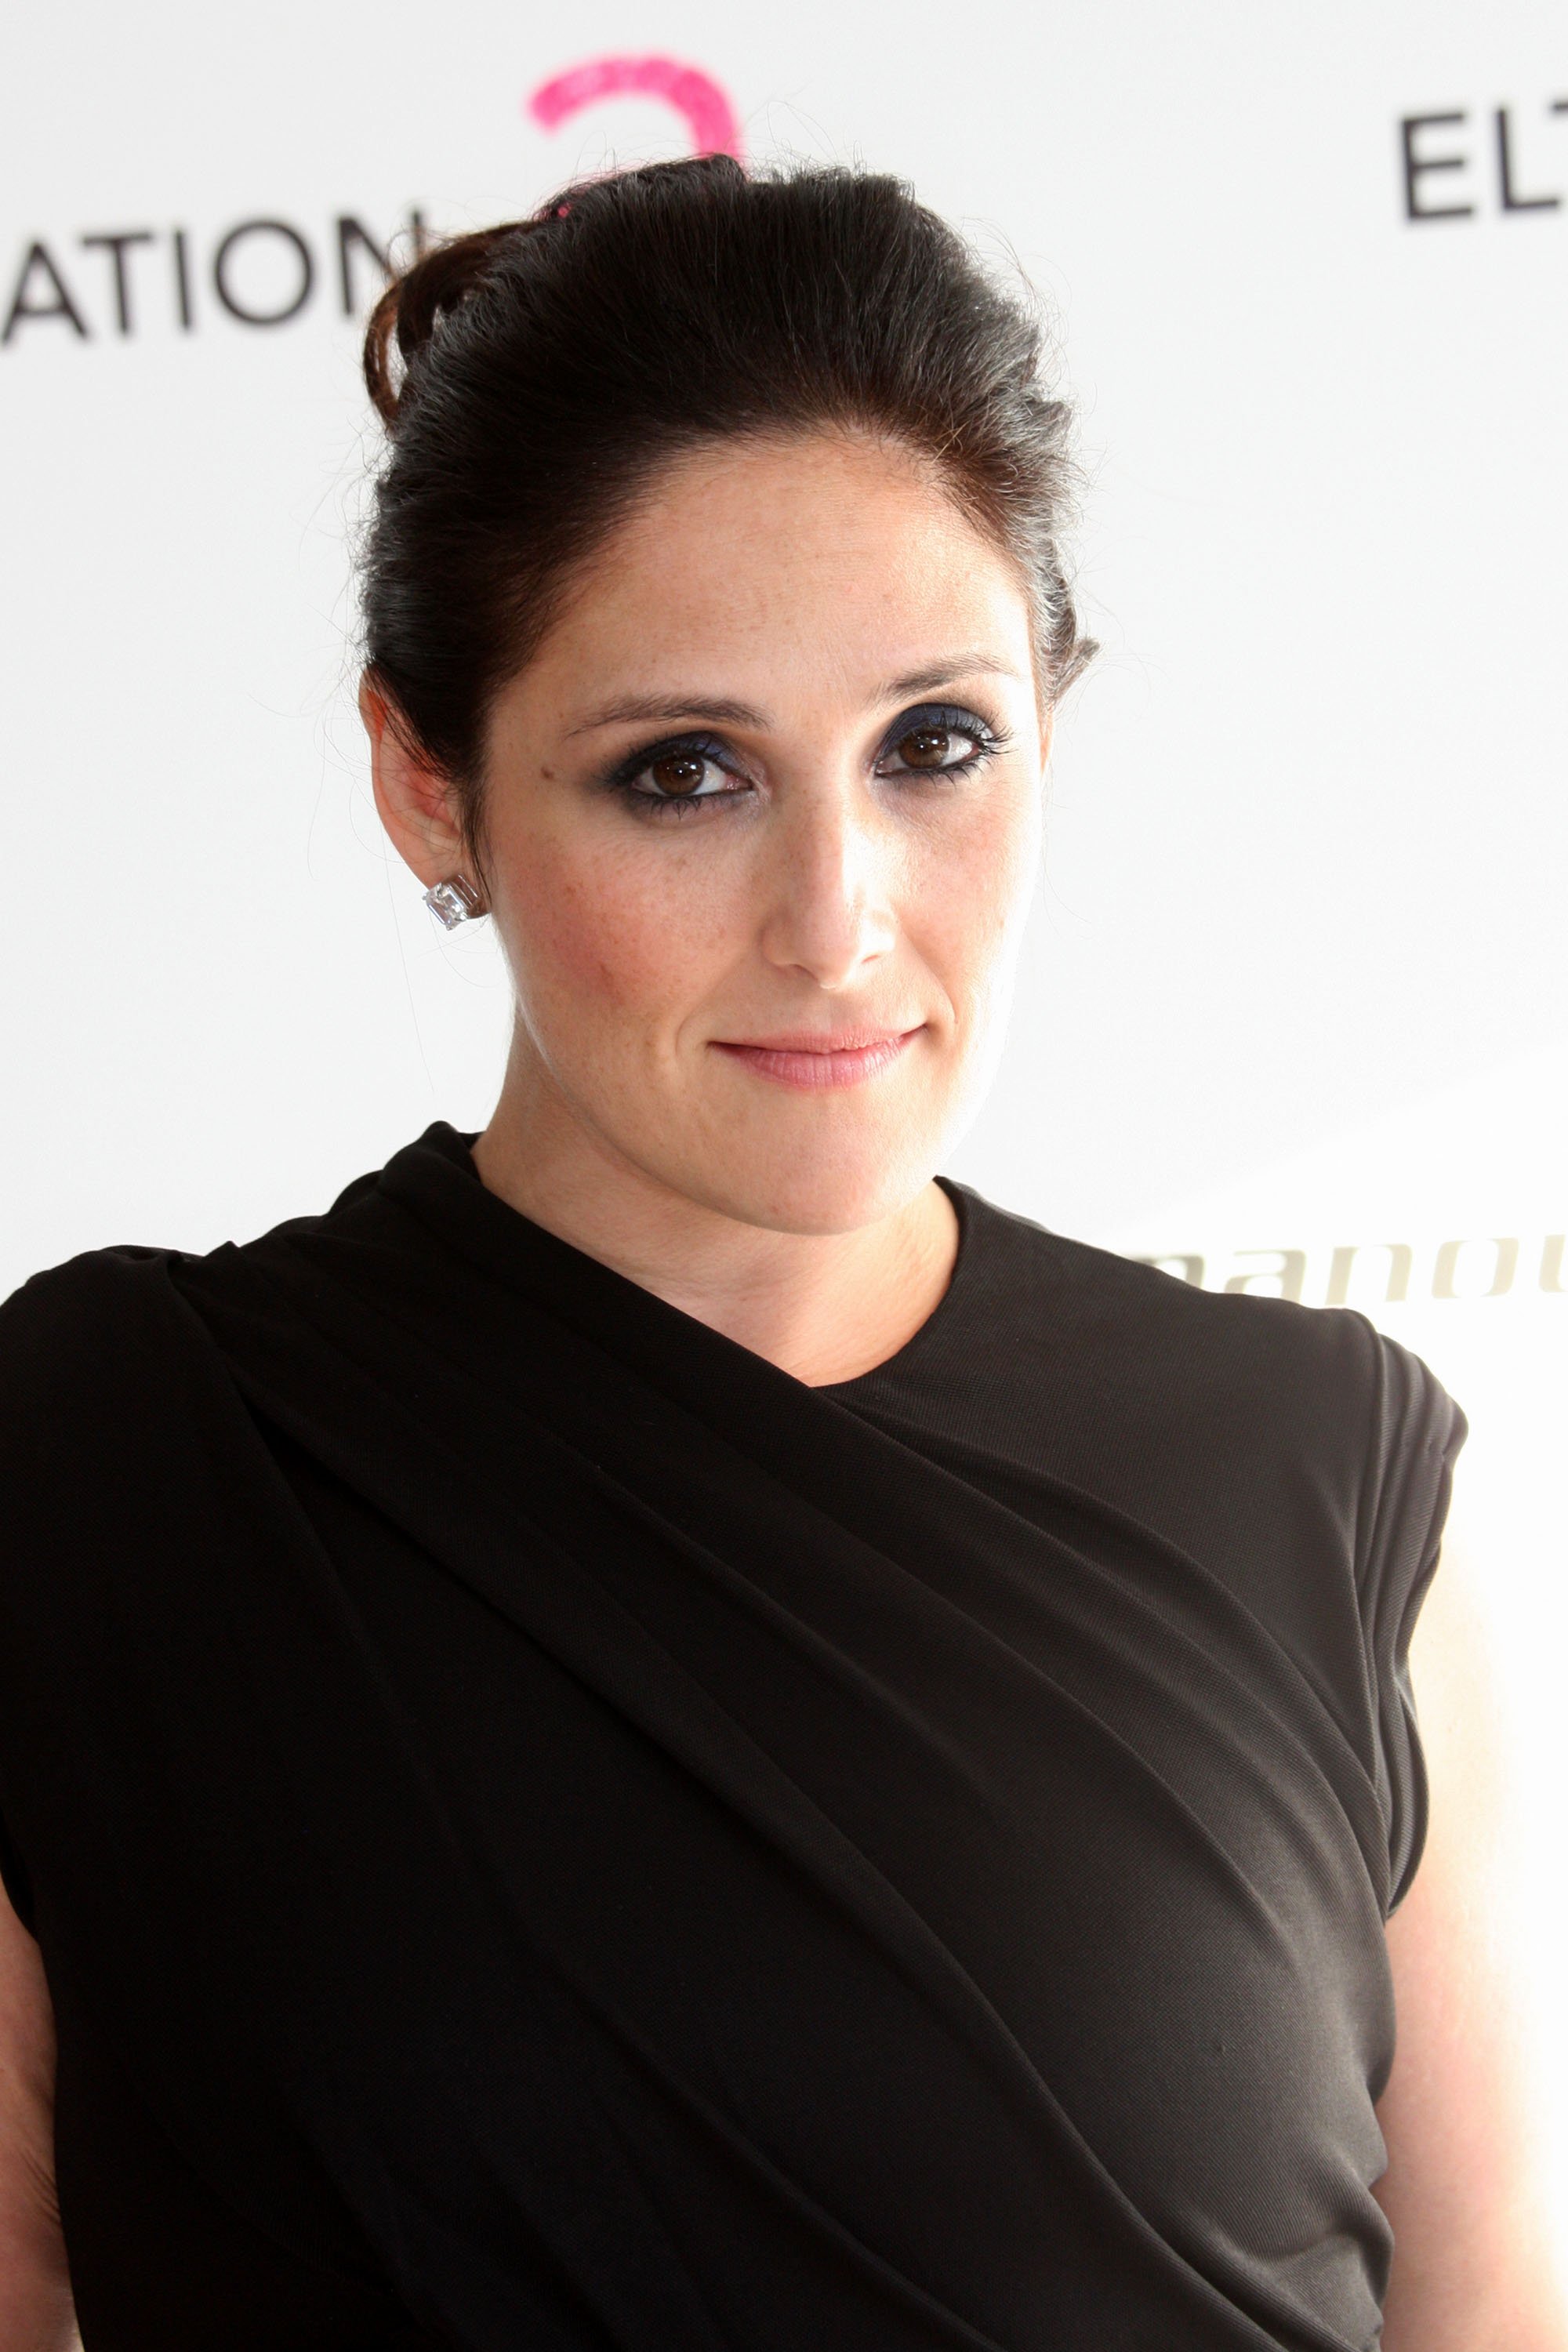 Ricki Lake on March 7, 2010 in Los Angeles, California | Photo: Getty Images